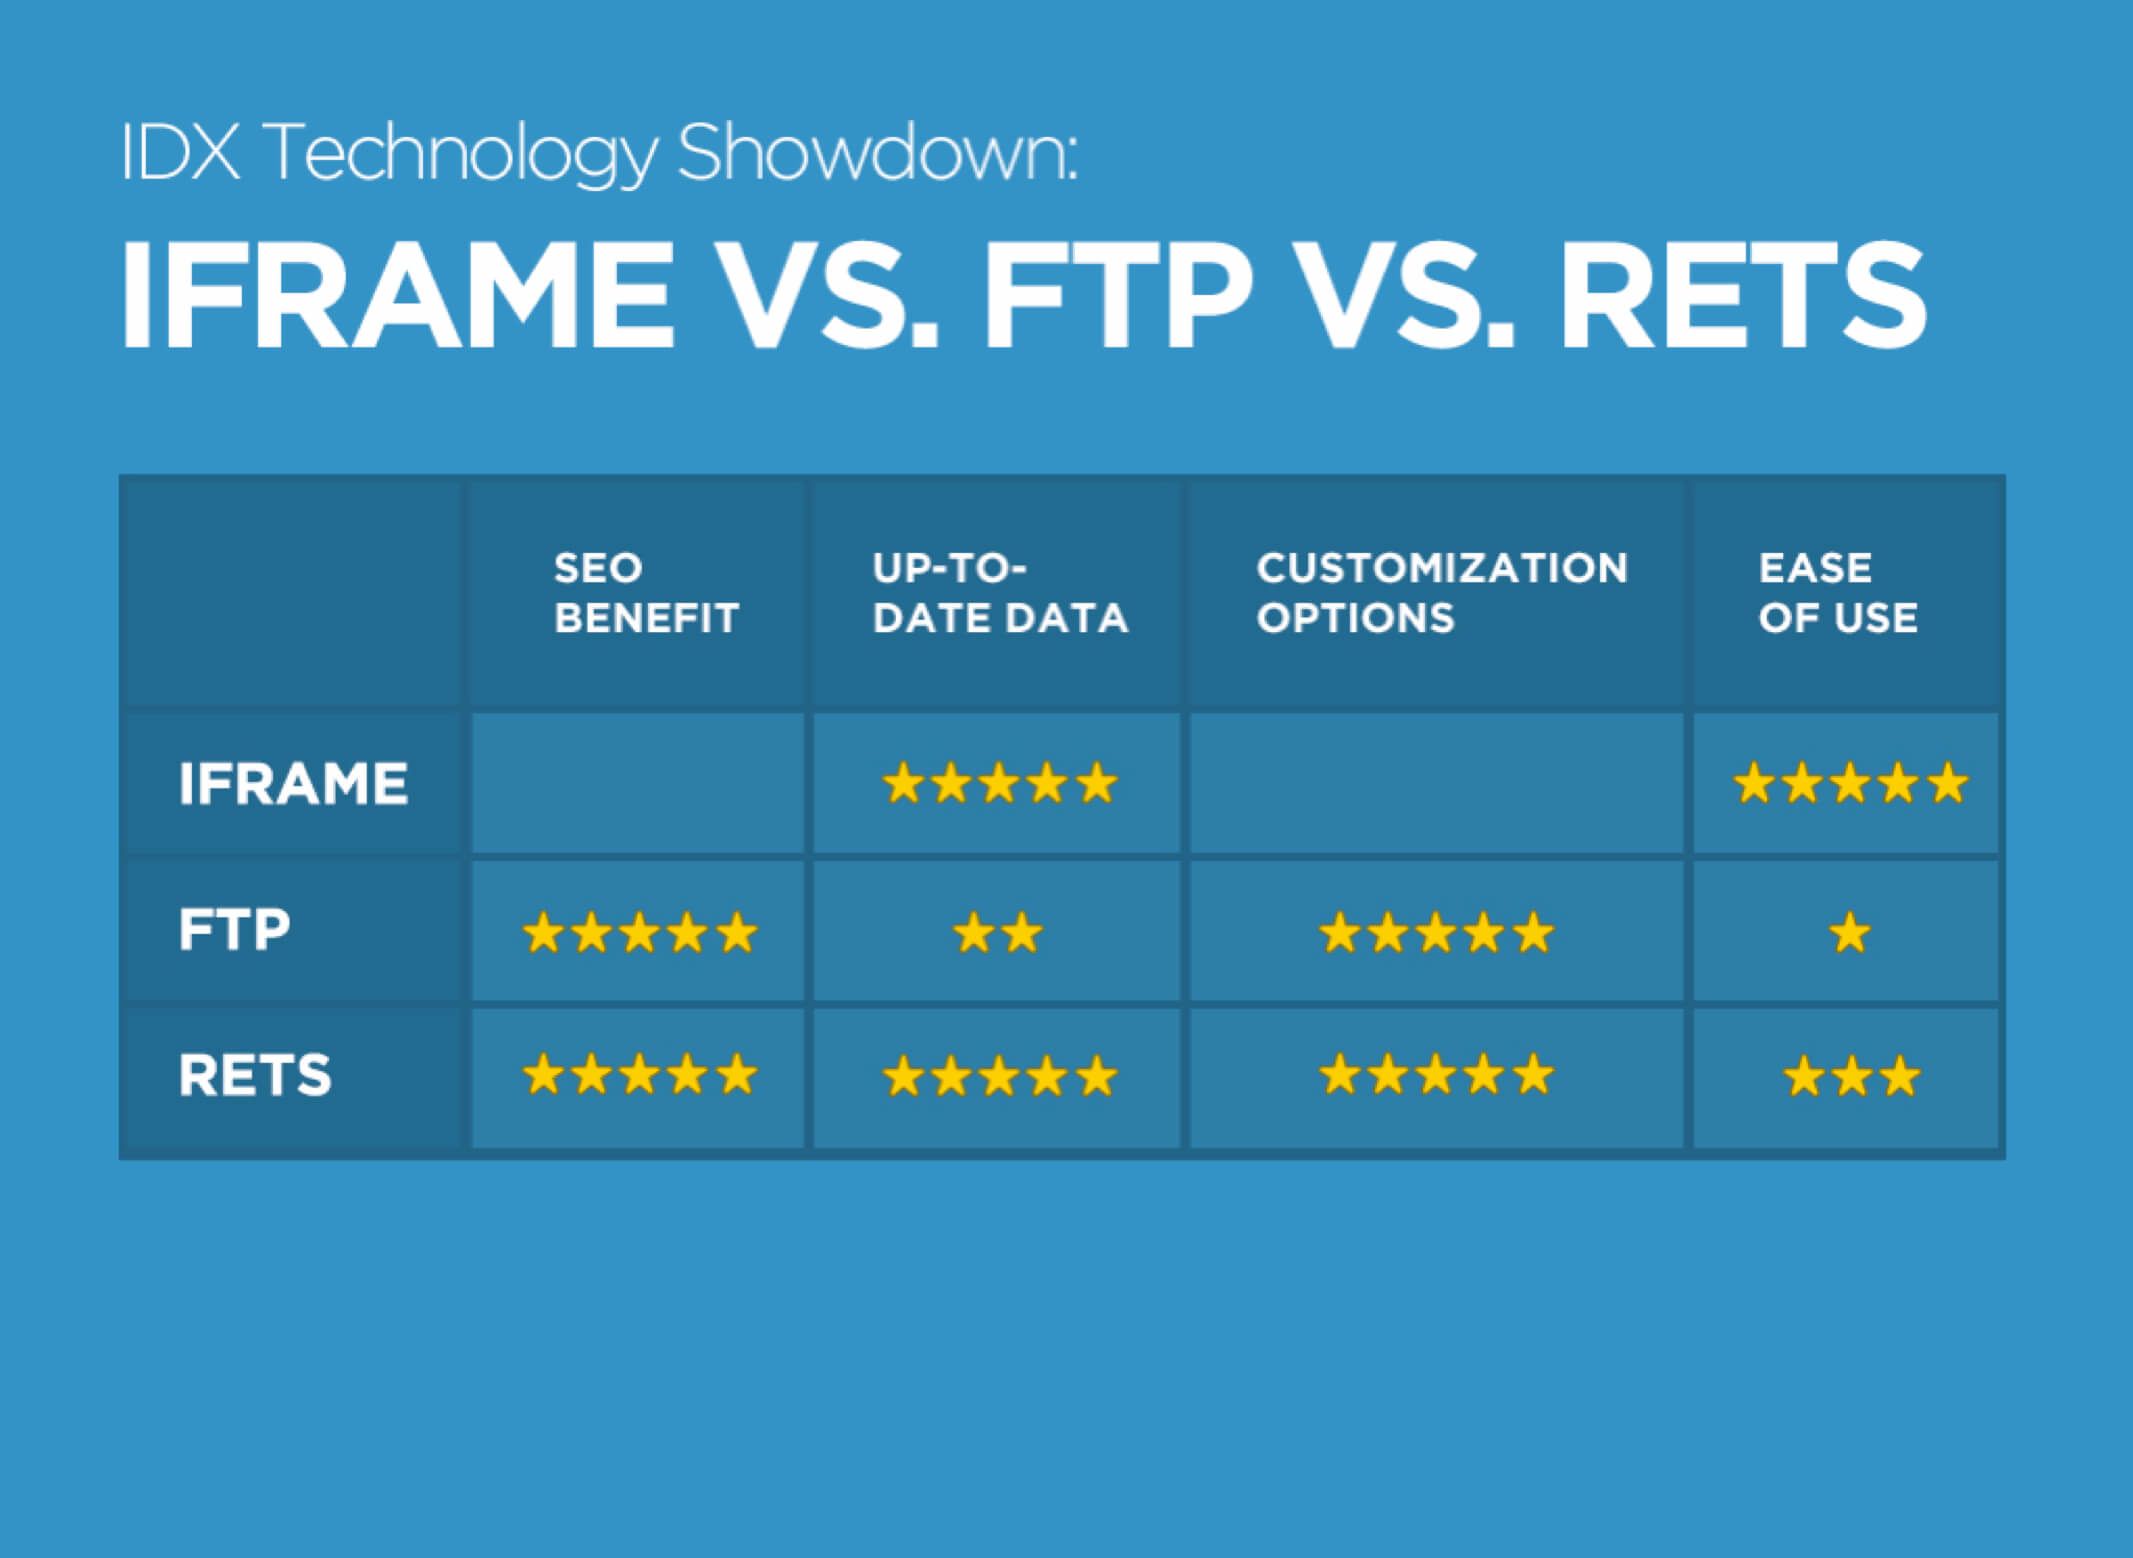 IDX Explained: The Differences Between an iframe, FTP, & RETS